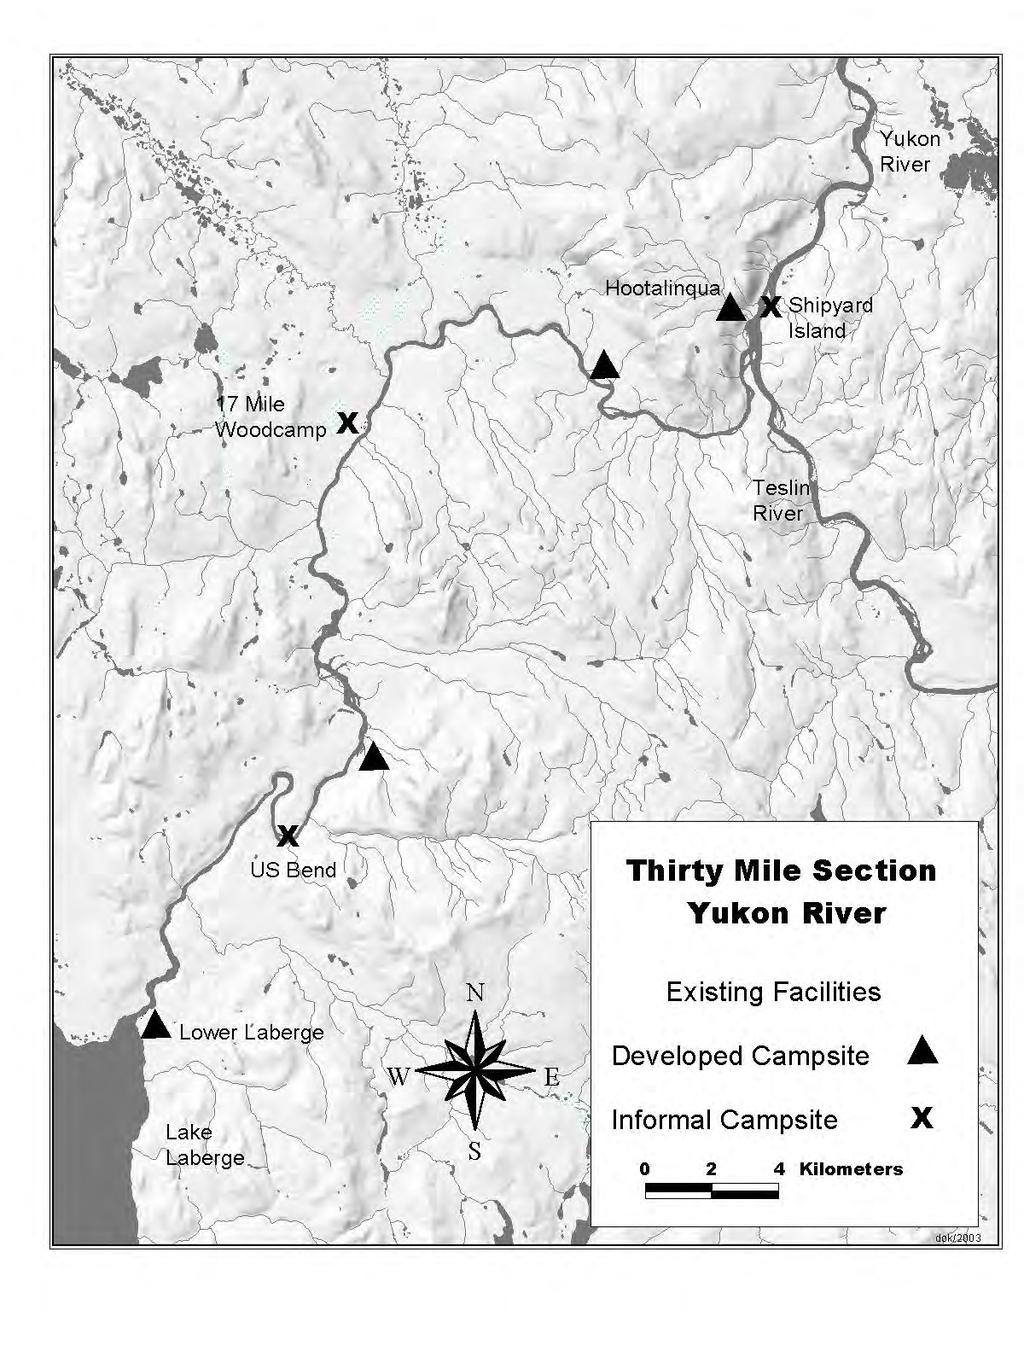 The 1990 Management plan for the Thirty Mile recommended a Management Group to be established to act as the main advisory and coordinating body for this section of the river.